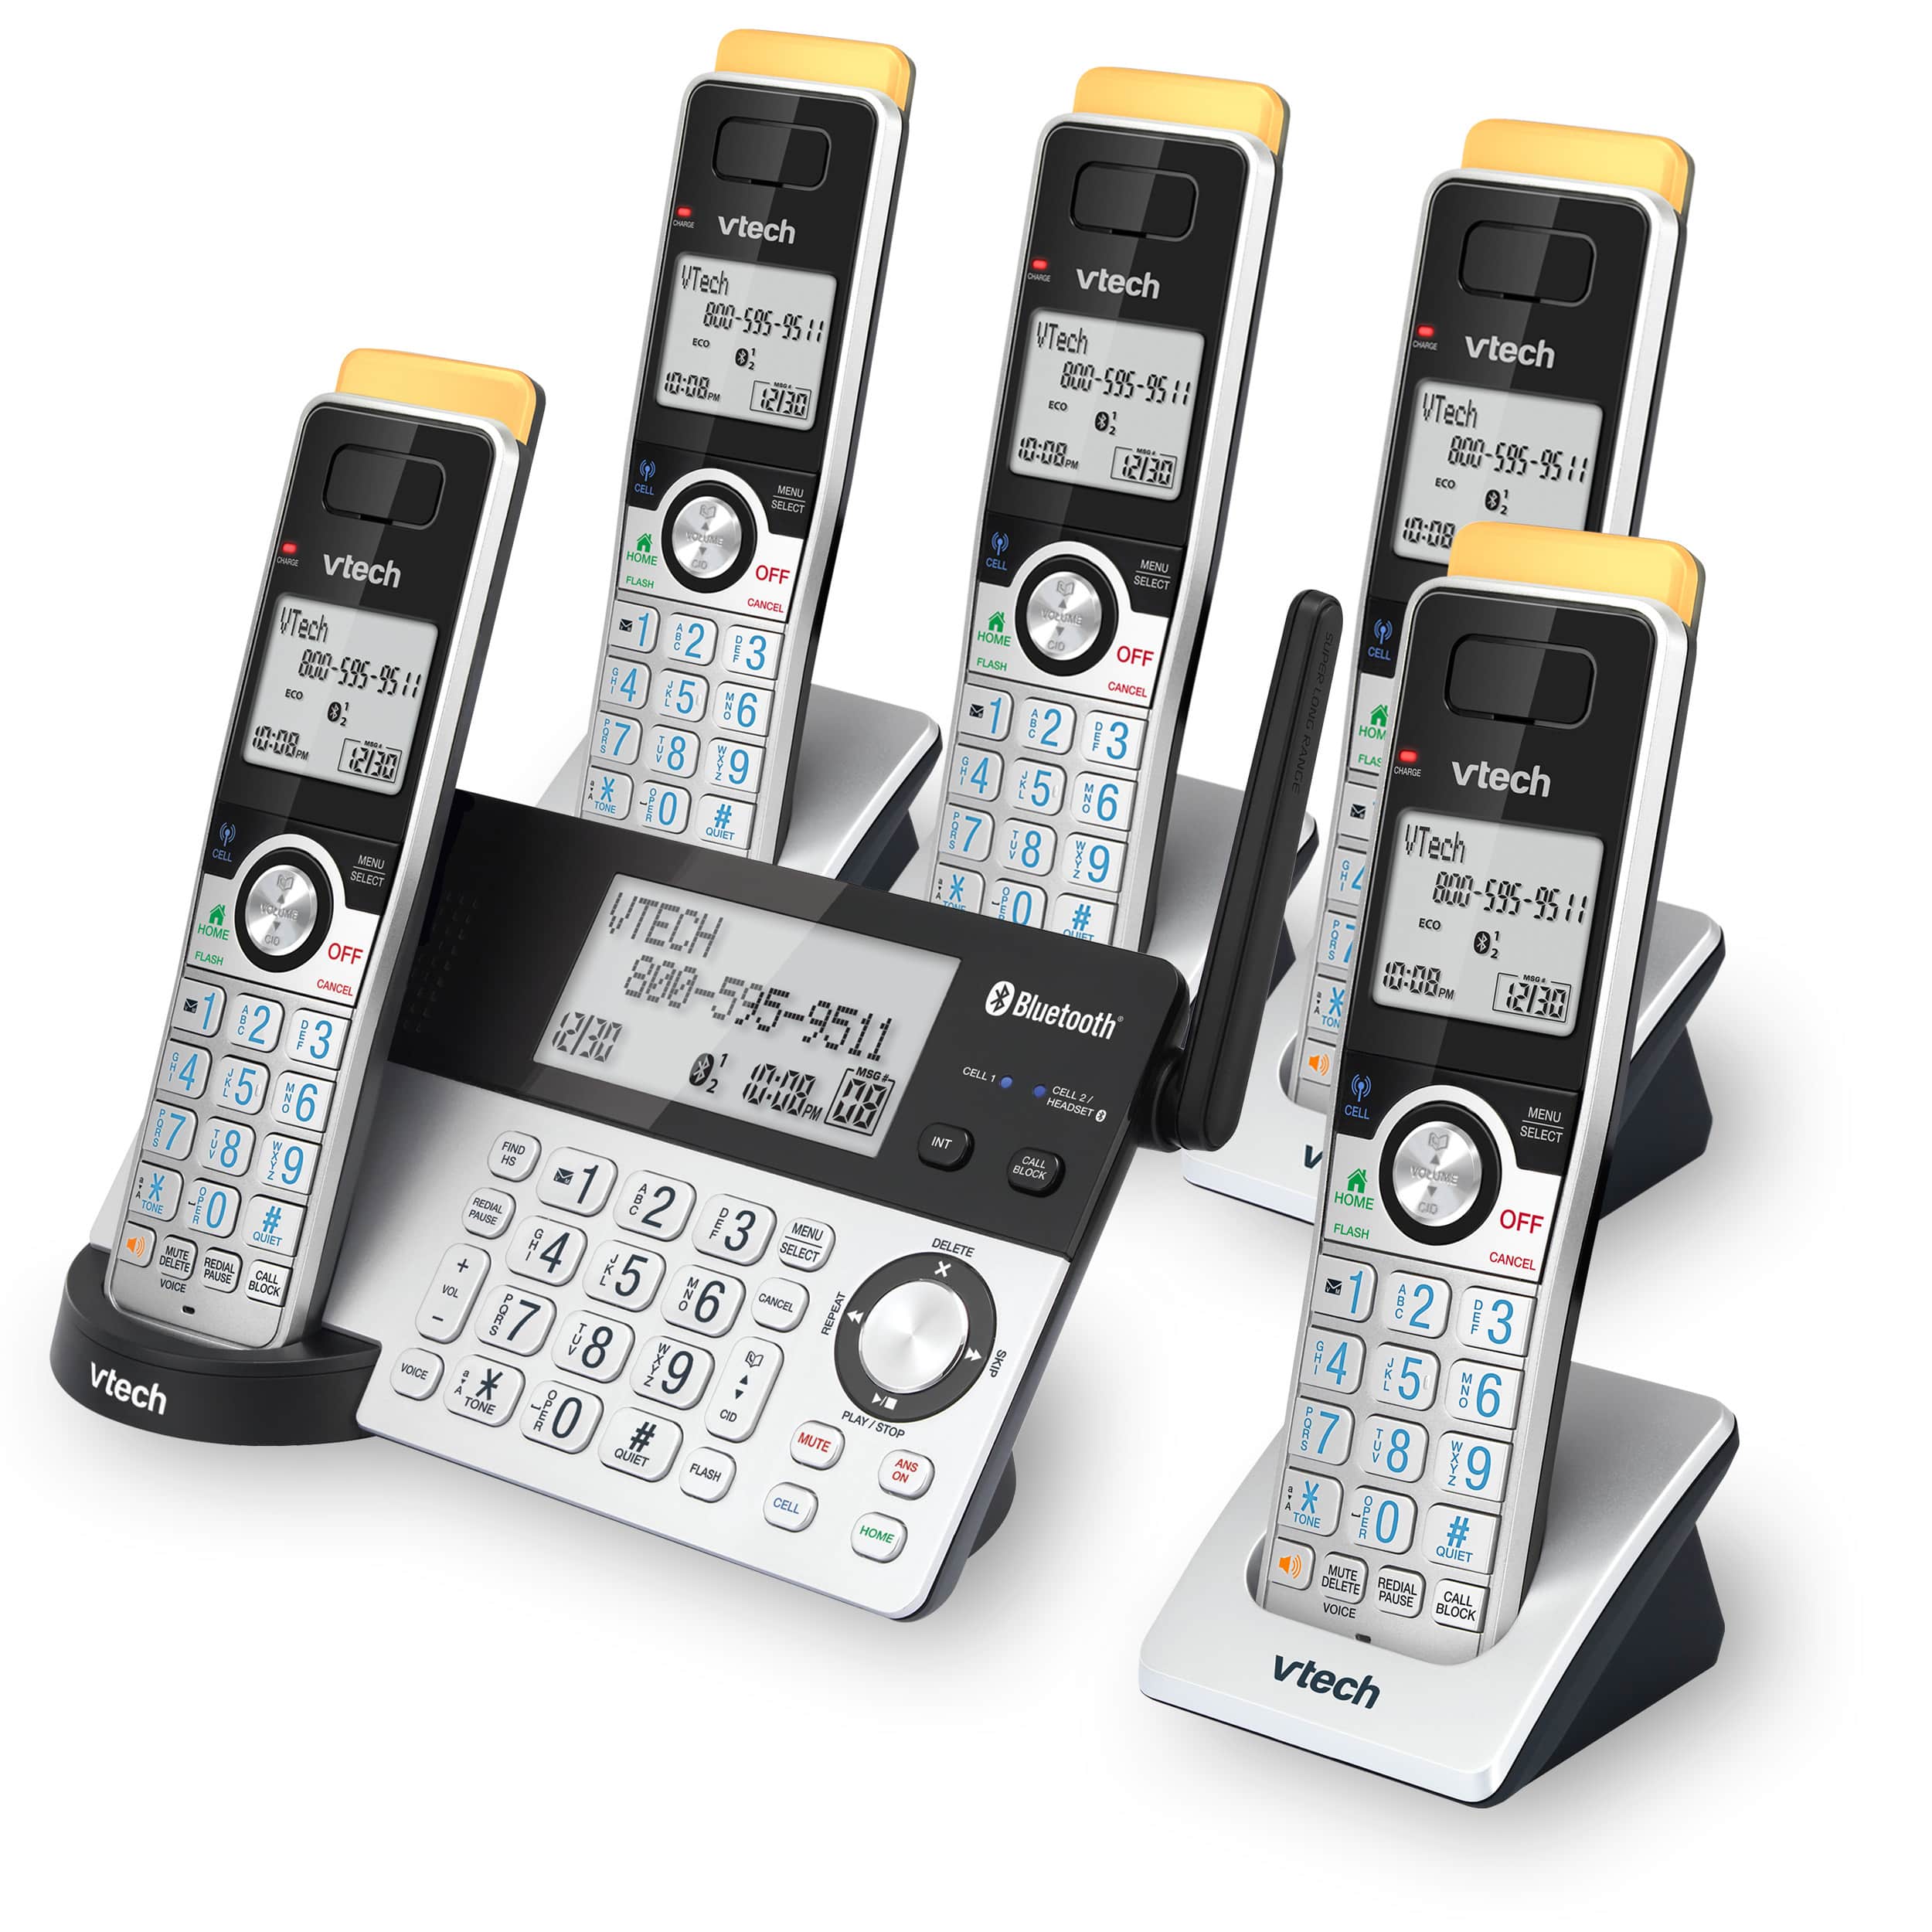 5-Handset Expandable Cordless Phone with Super Long Range, Bluetooth Connect to Cell, Smart Call Blocker and Answering System - view 9